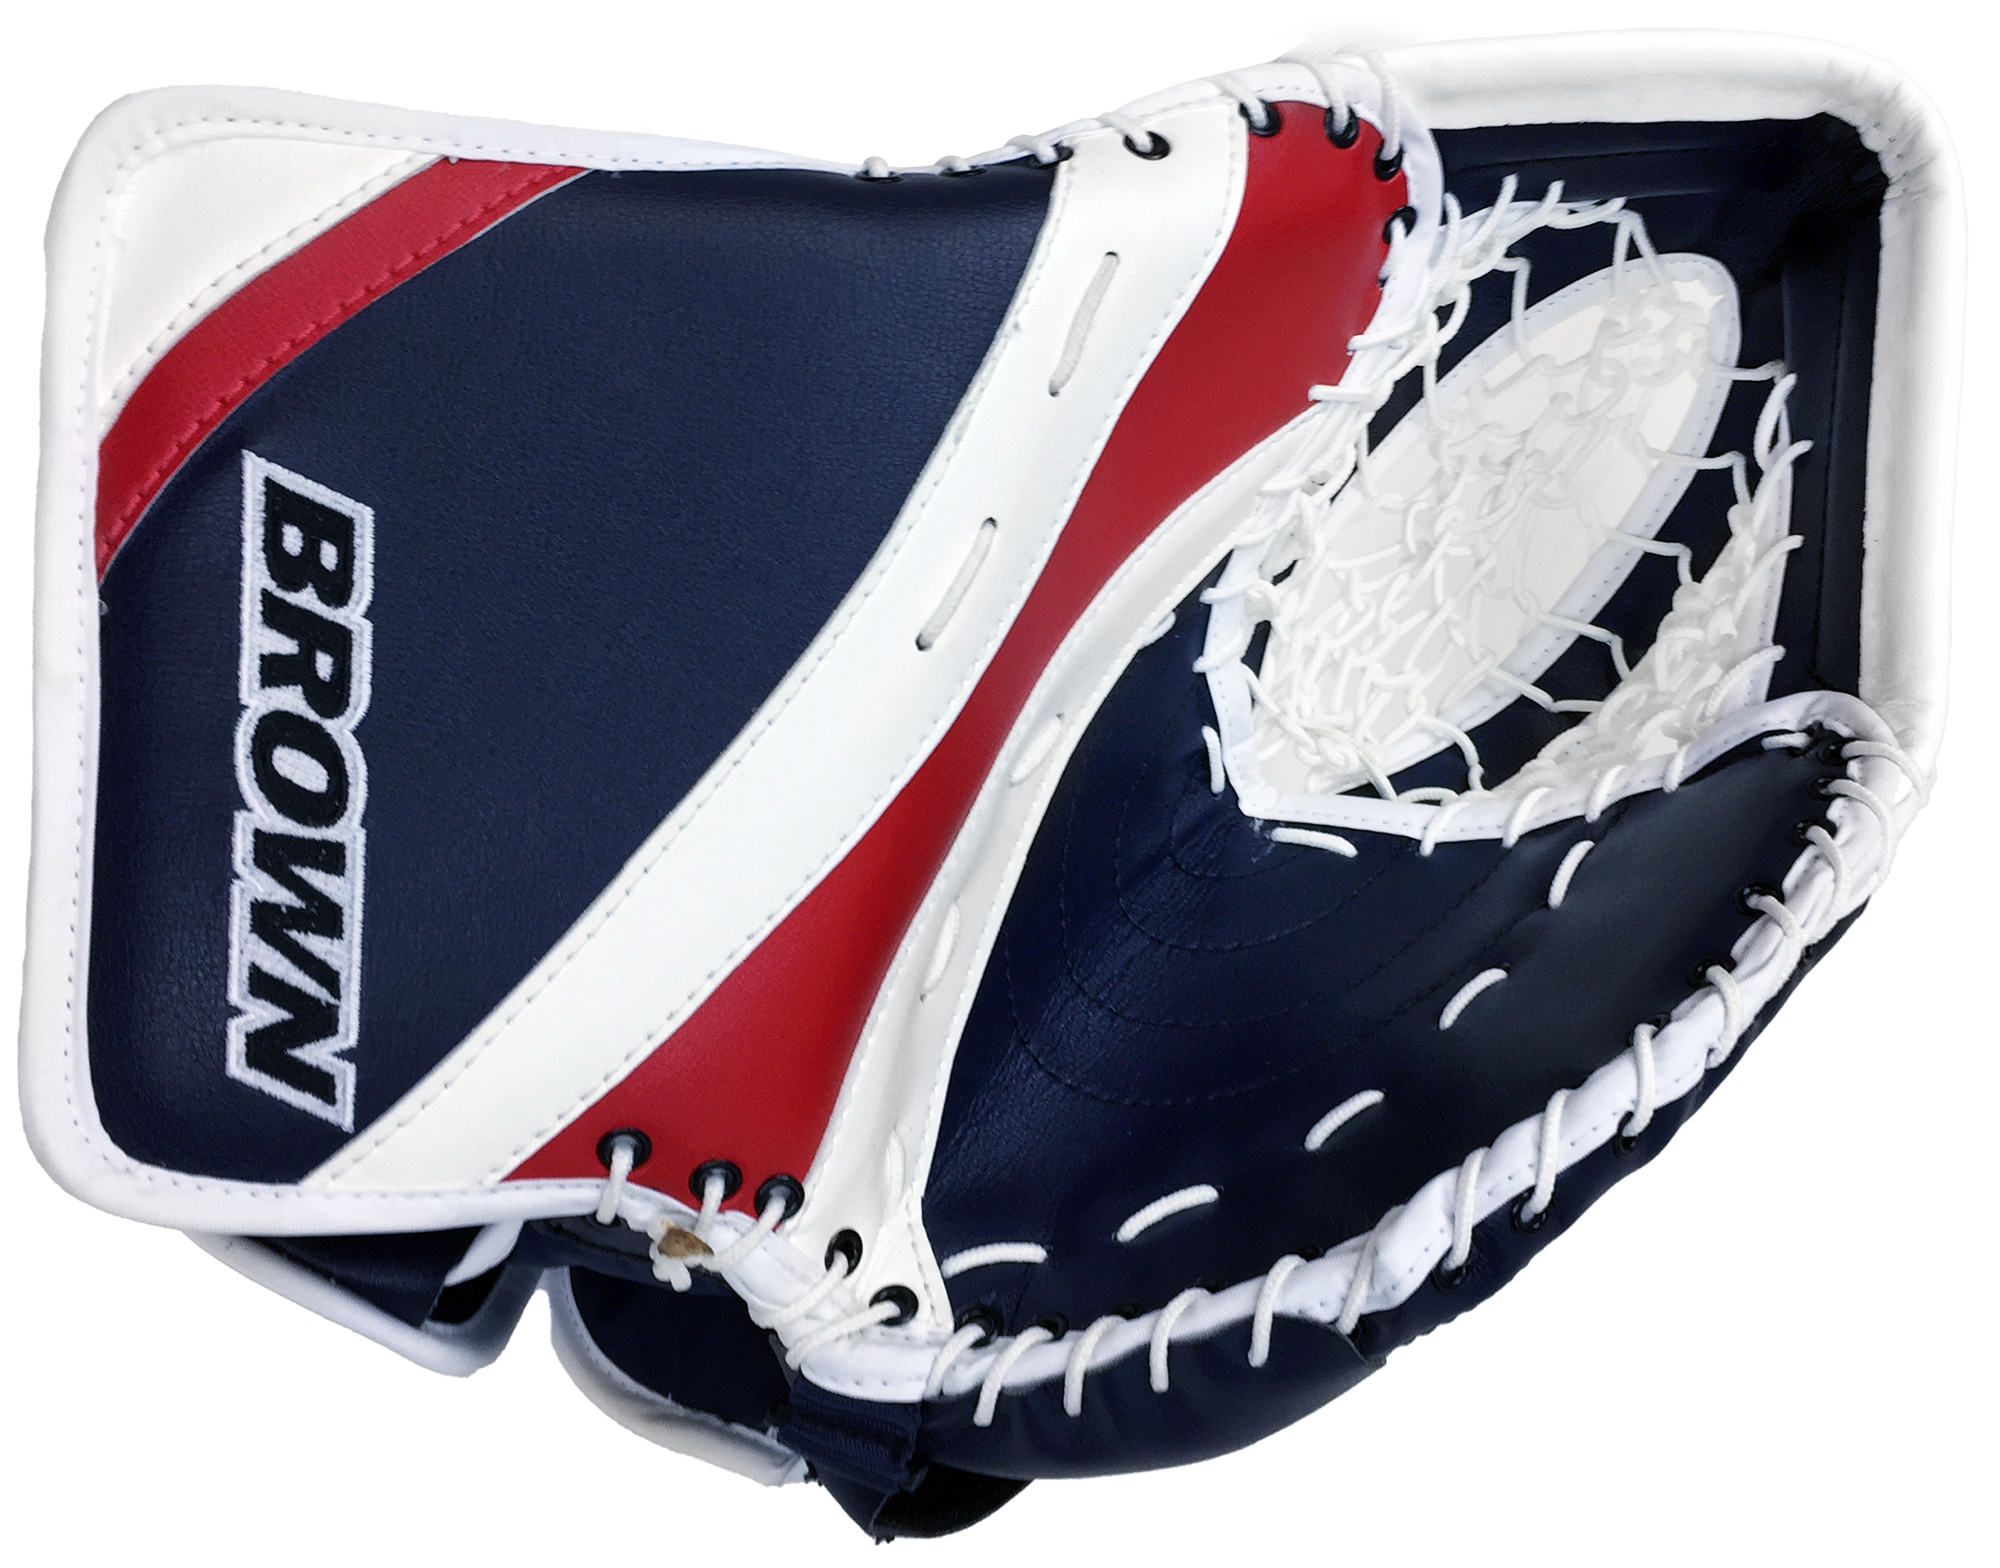 2500 white, red and navy blue catch glove